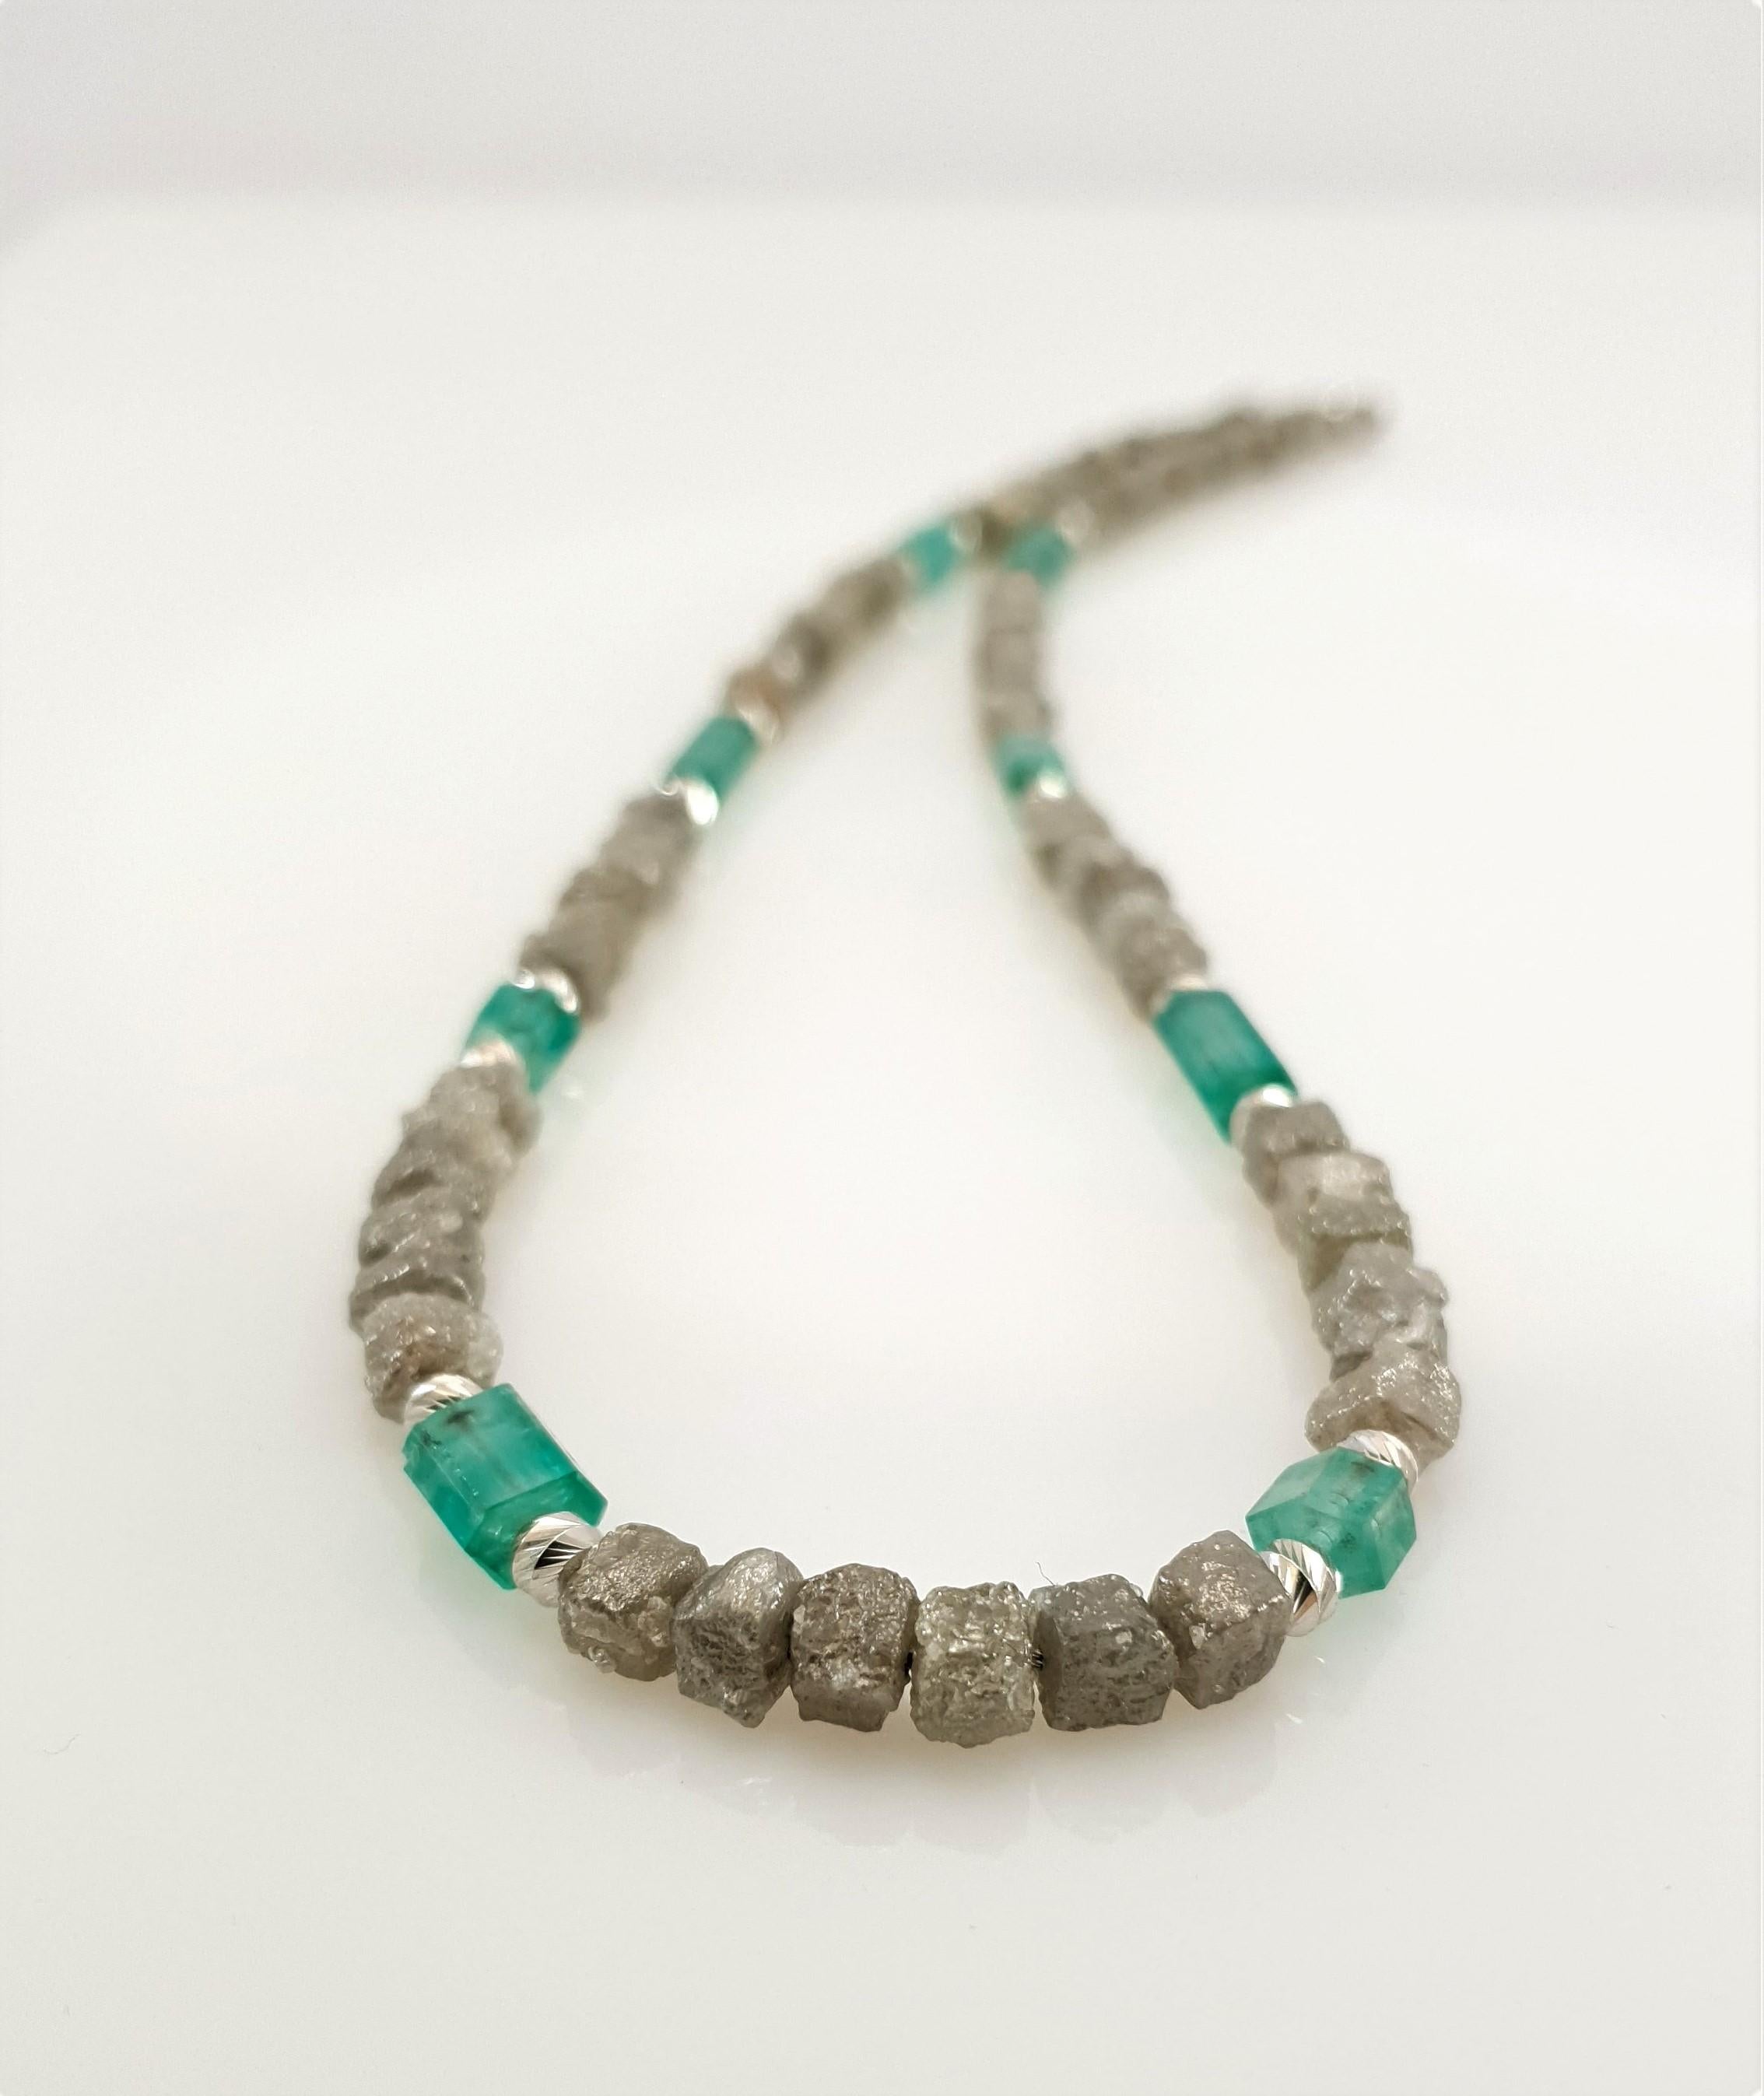 Natural Diamond and Emerald Crystals Beads Necklace with 18 Carat White Gold For Sale 2